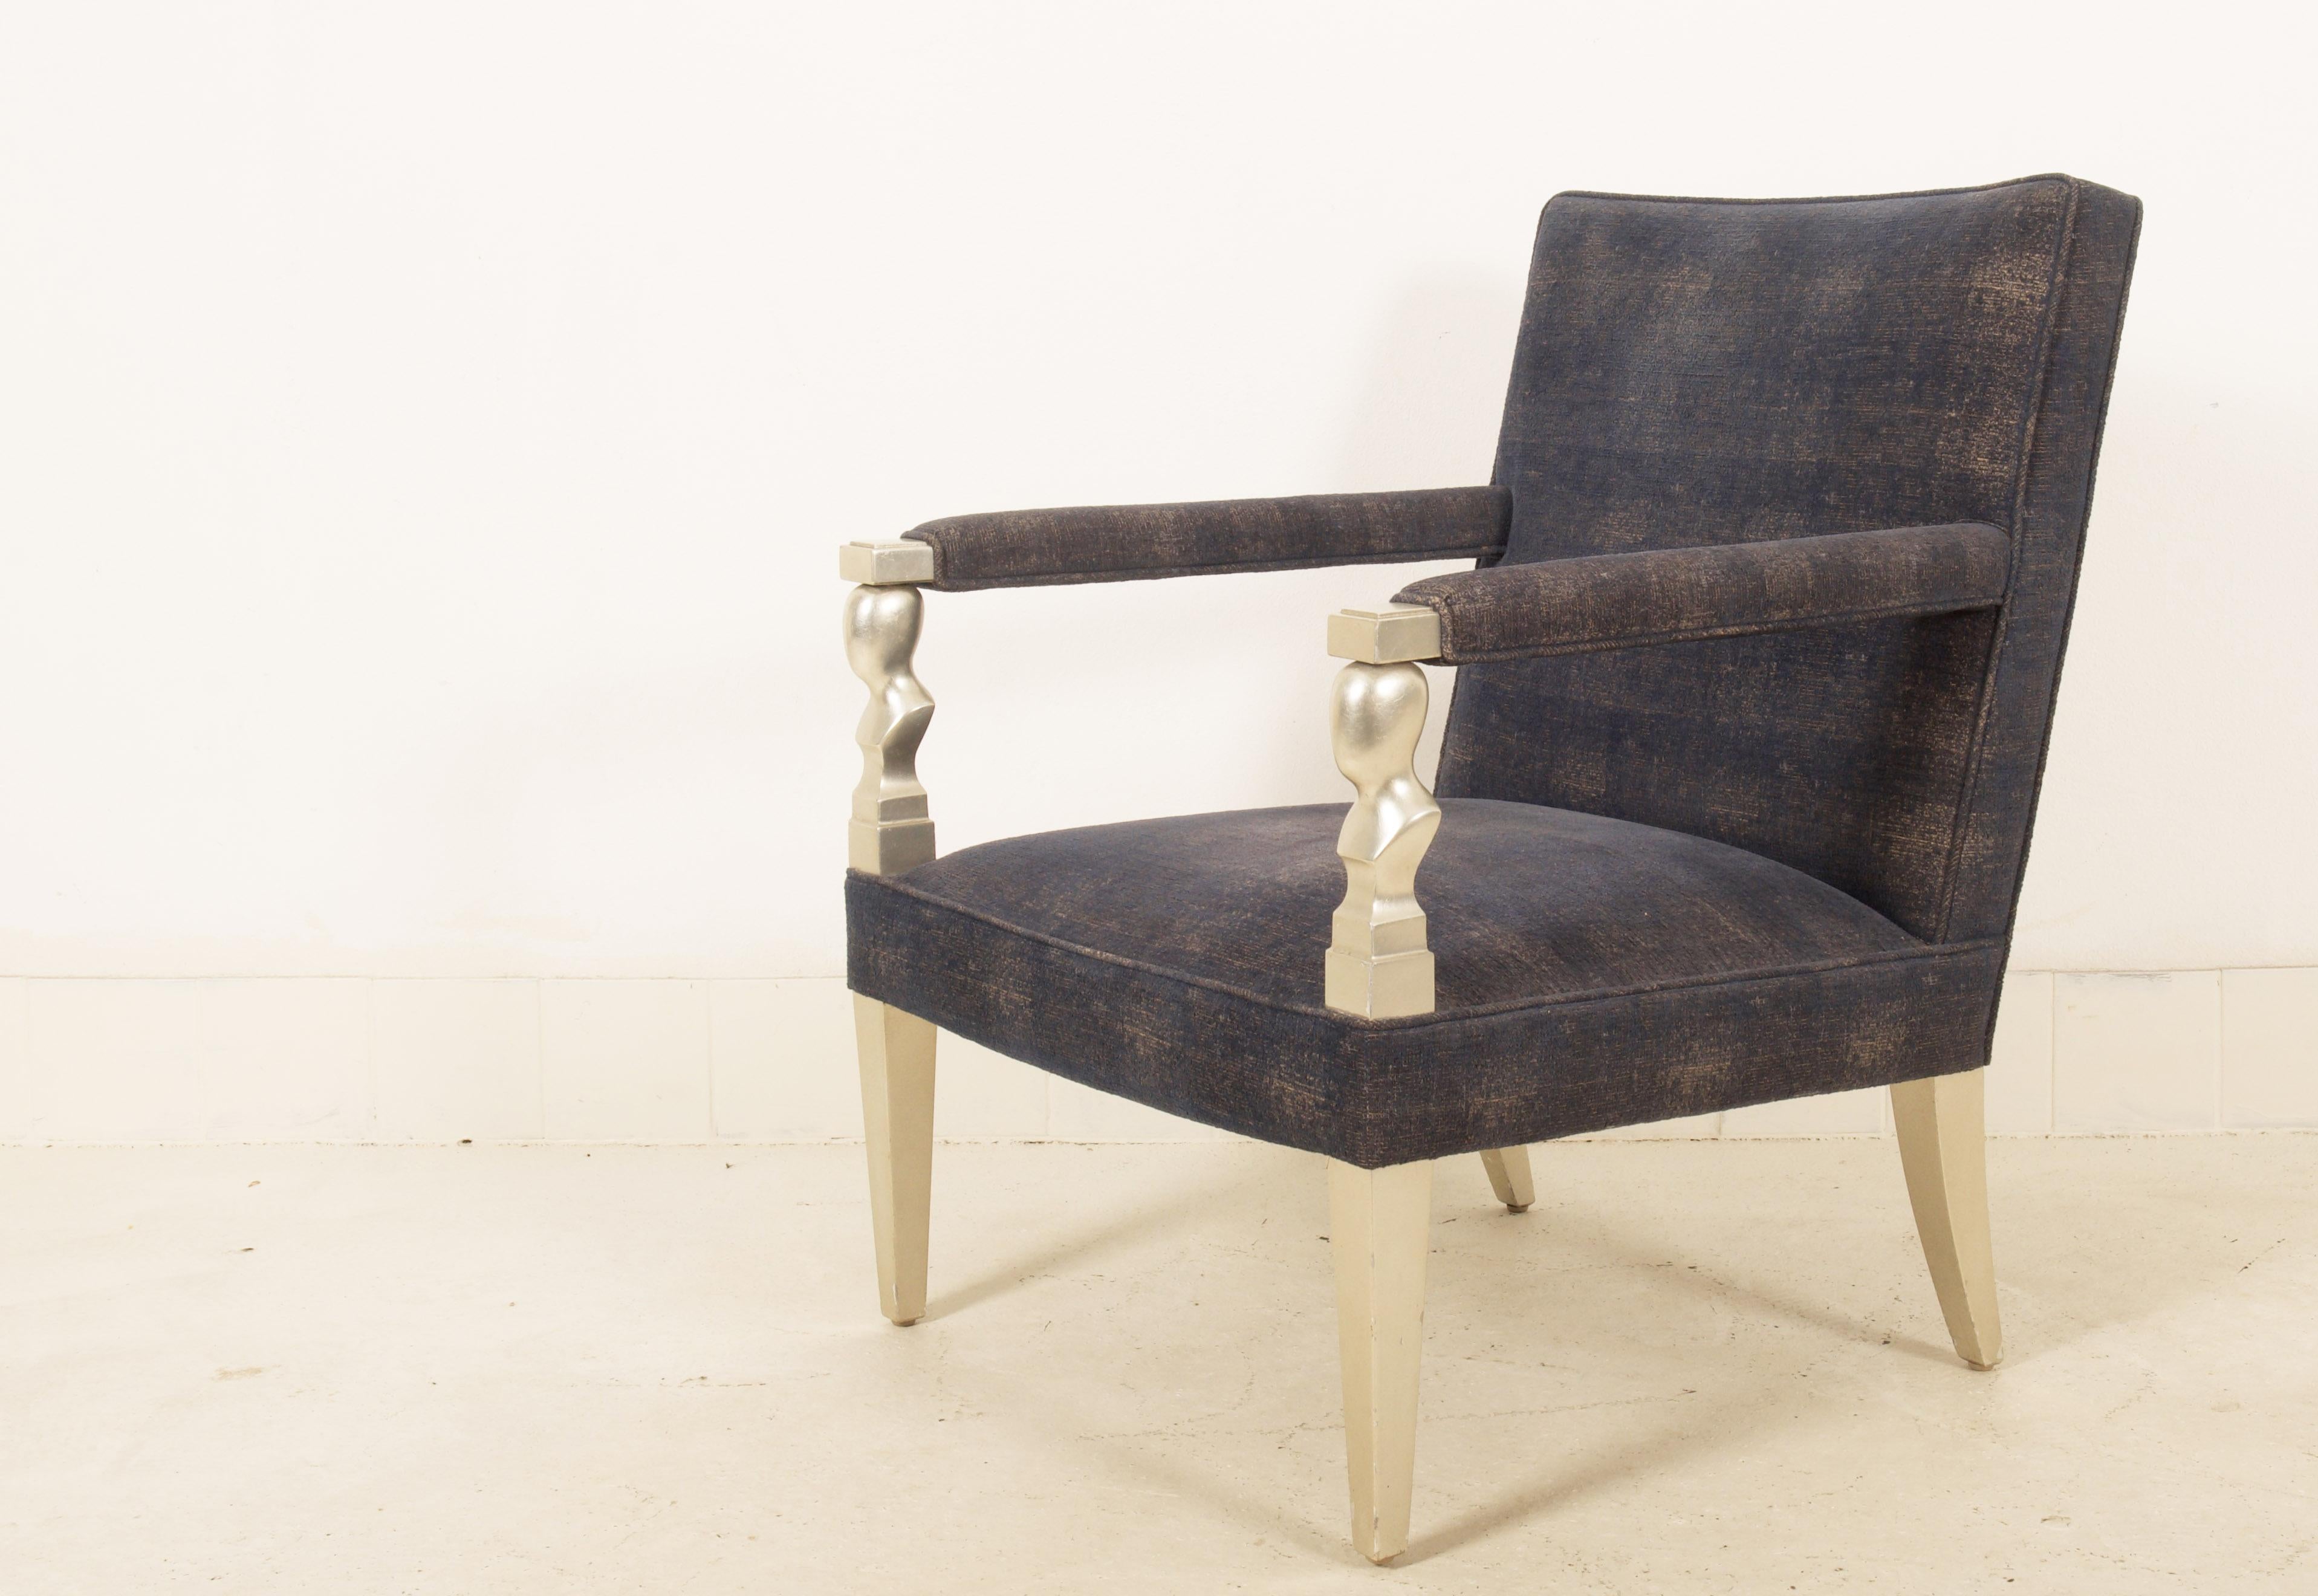 Post-Modern Brancusi Style Armchair by John Hutton for Donghia. For Sale